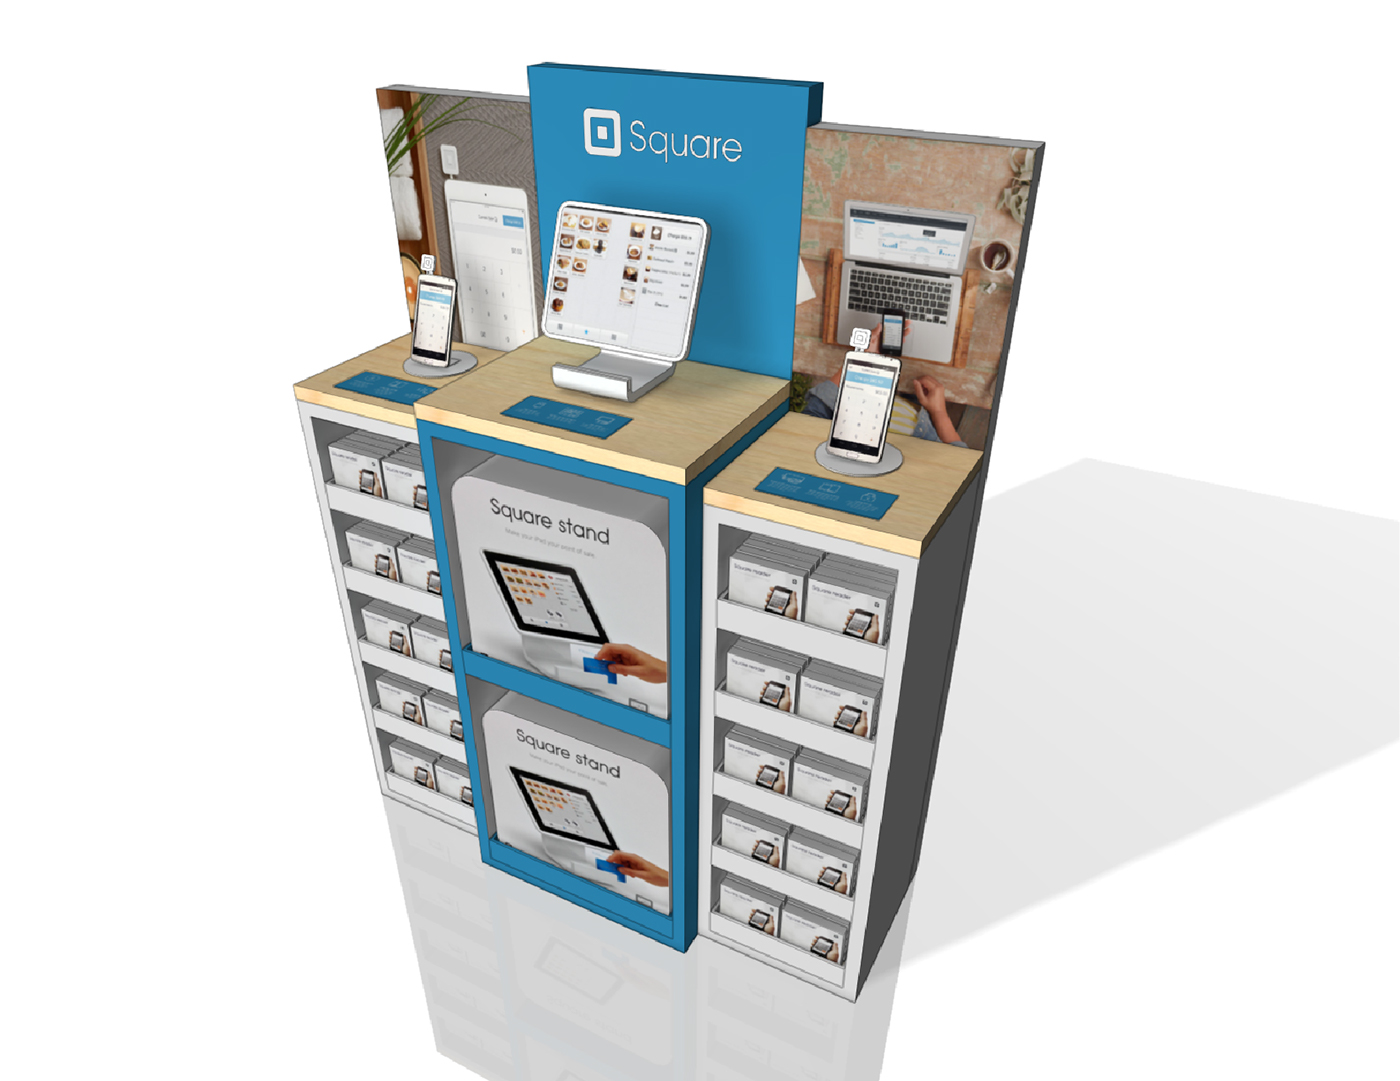 Display Retail merchandising pos free standing counter credit card payment design